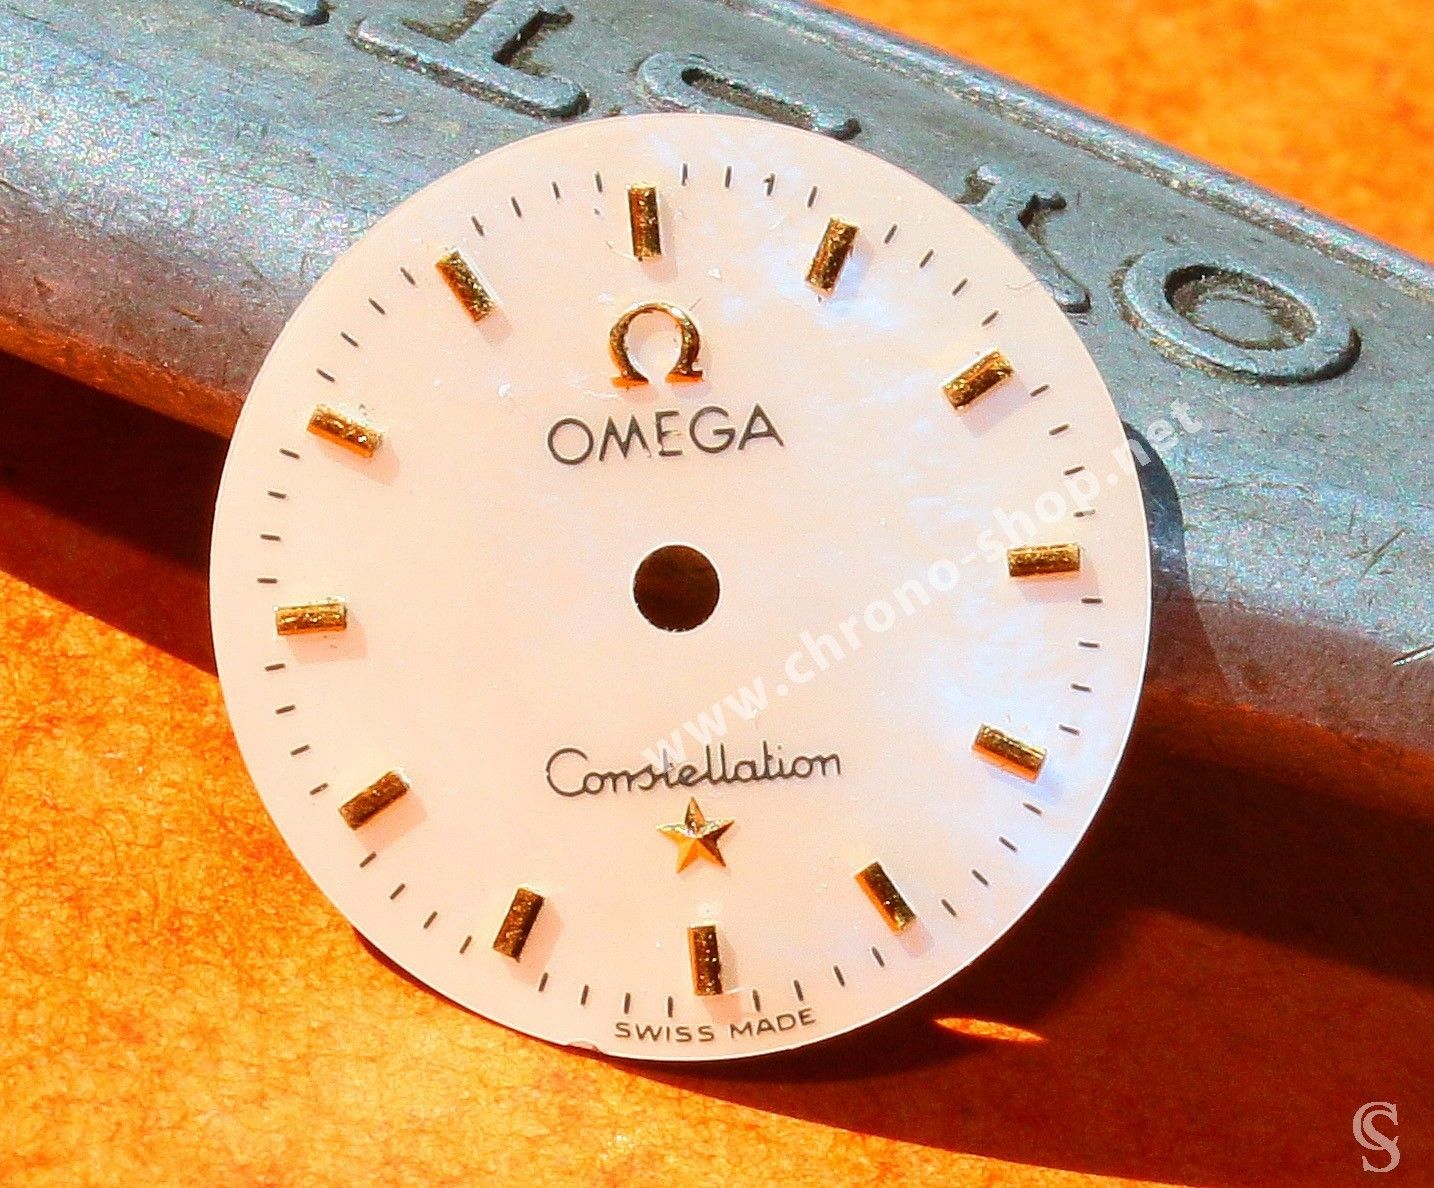 used ladies omega watches for sale